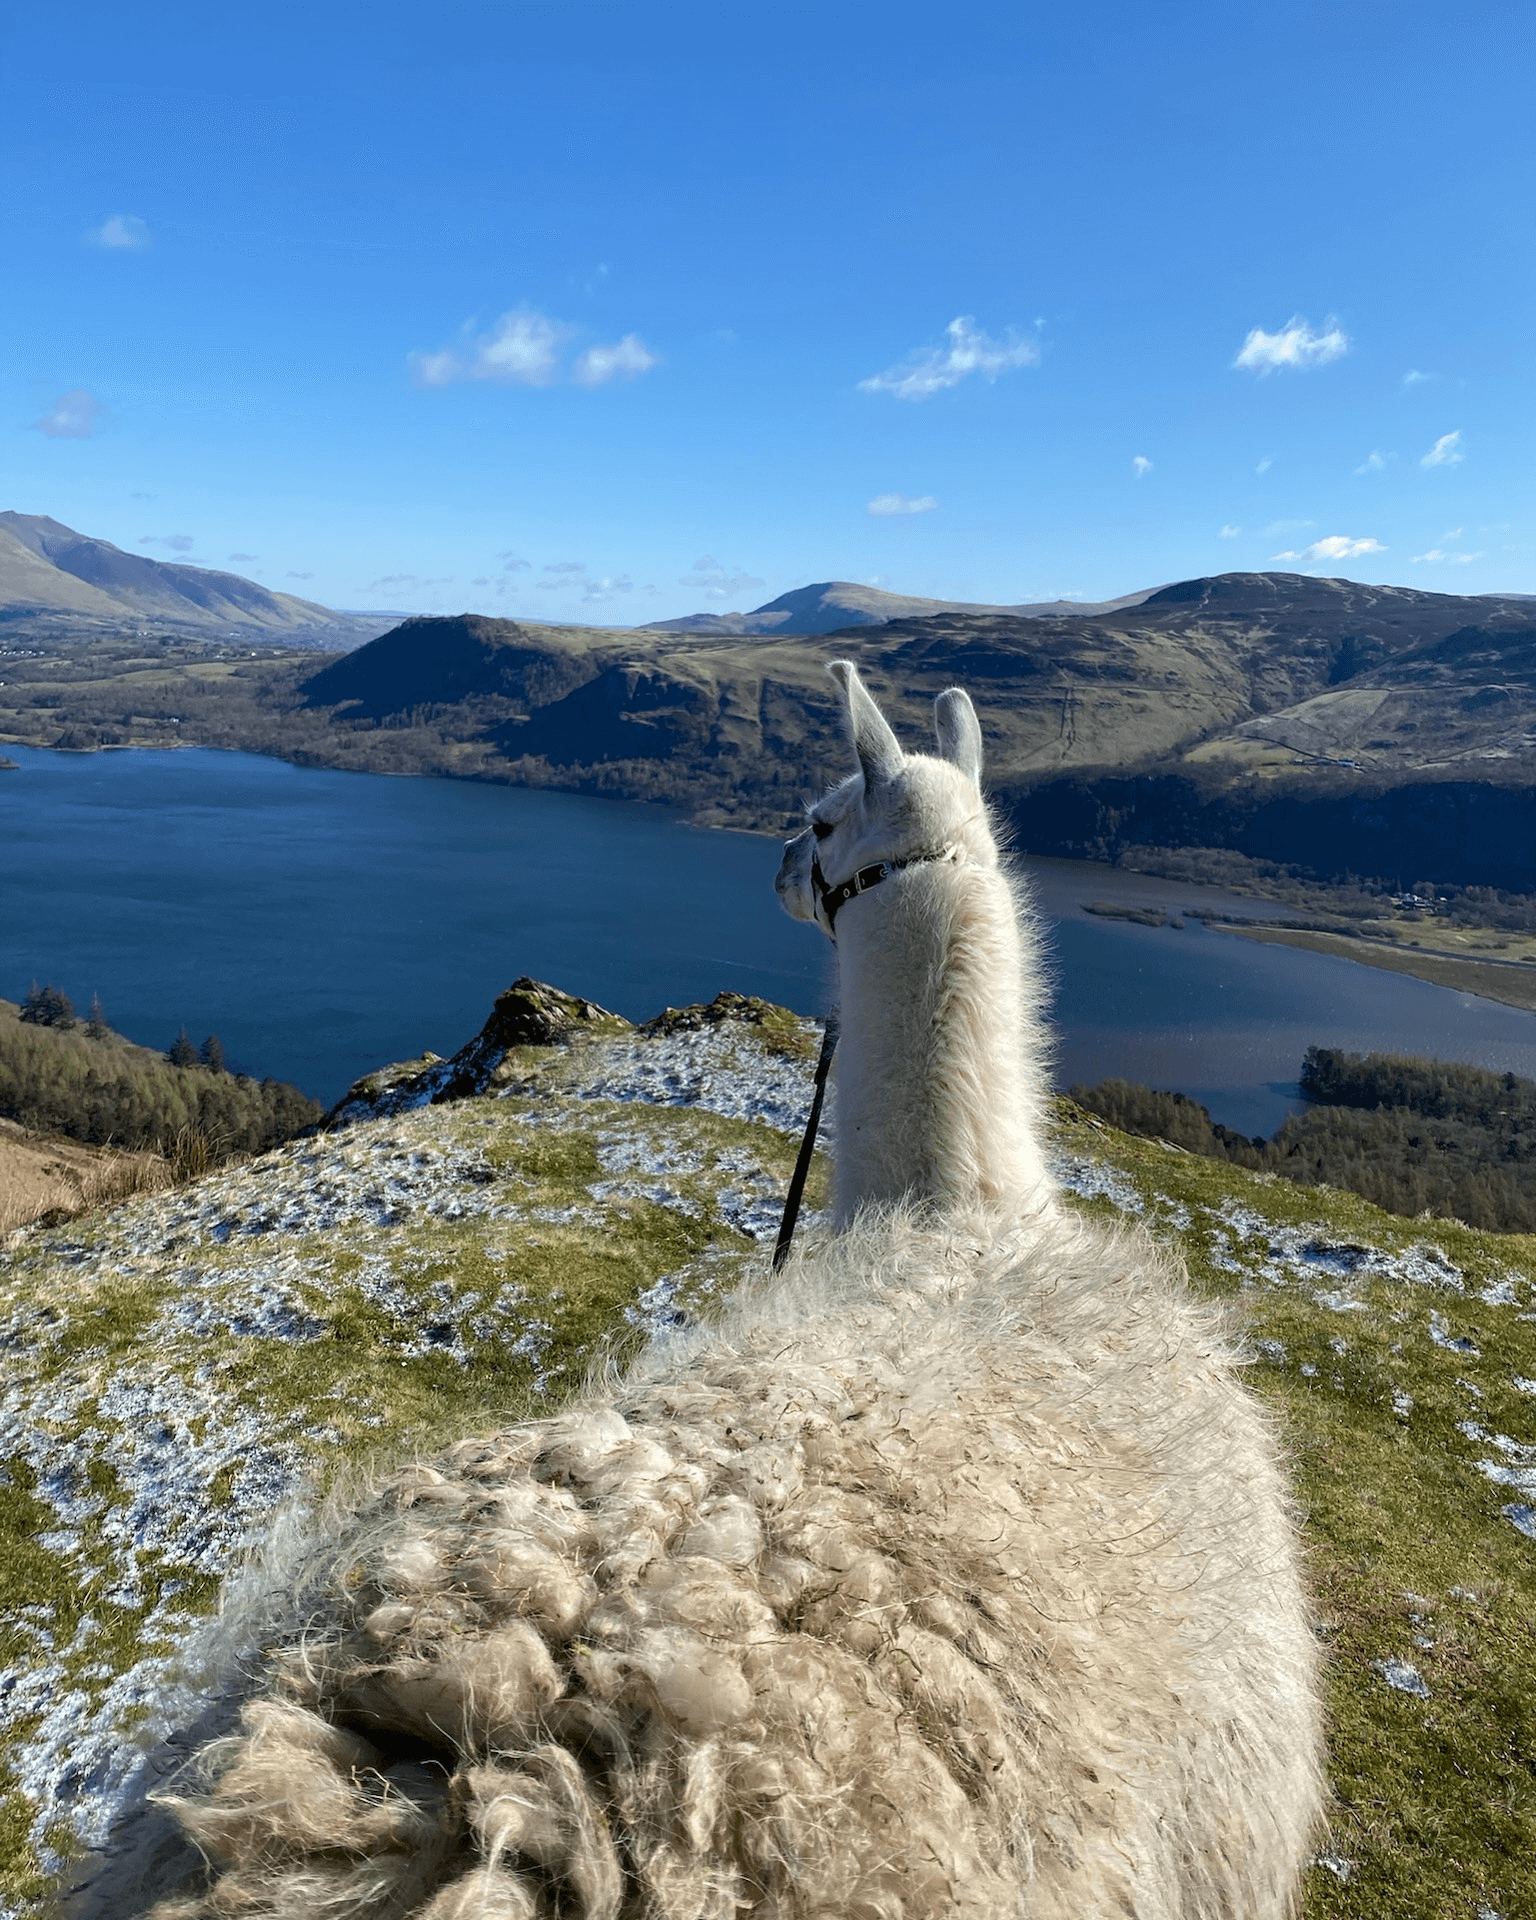 Alpacaly ever after, Lake District 